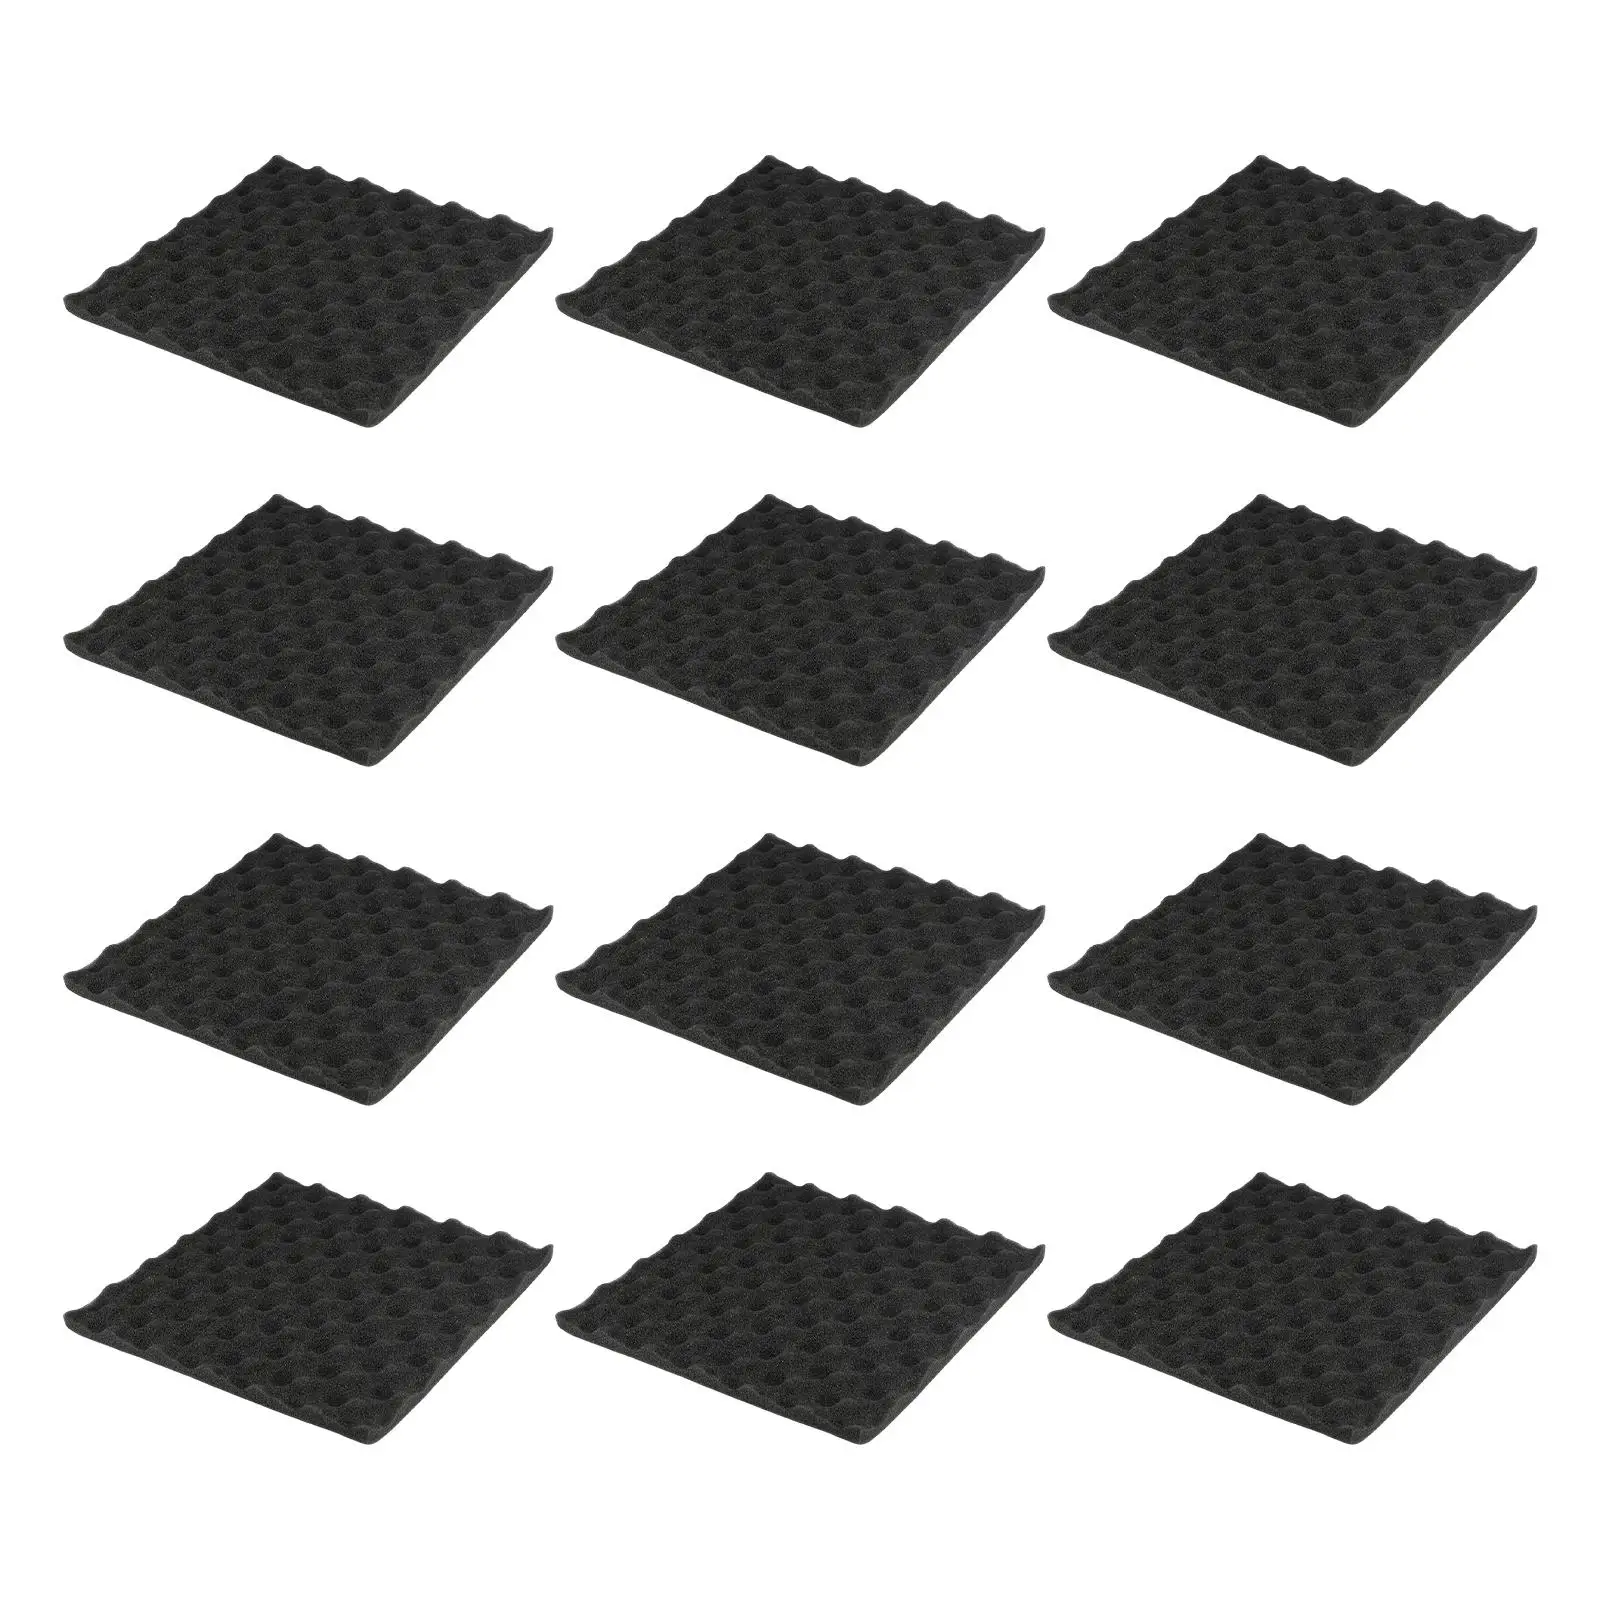 12 Pieces Soundproofing Acoustic Foam Panels Sound Panels Wedges for Home